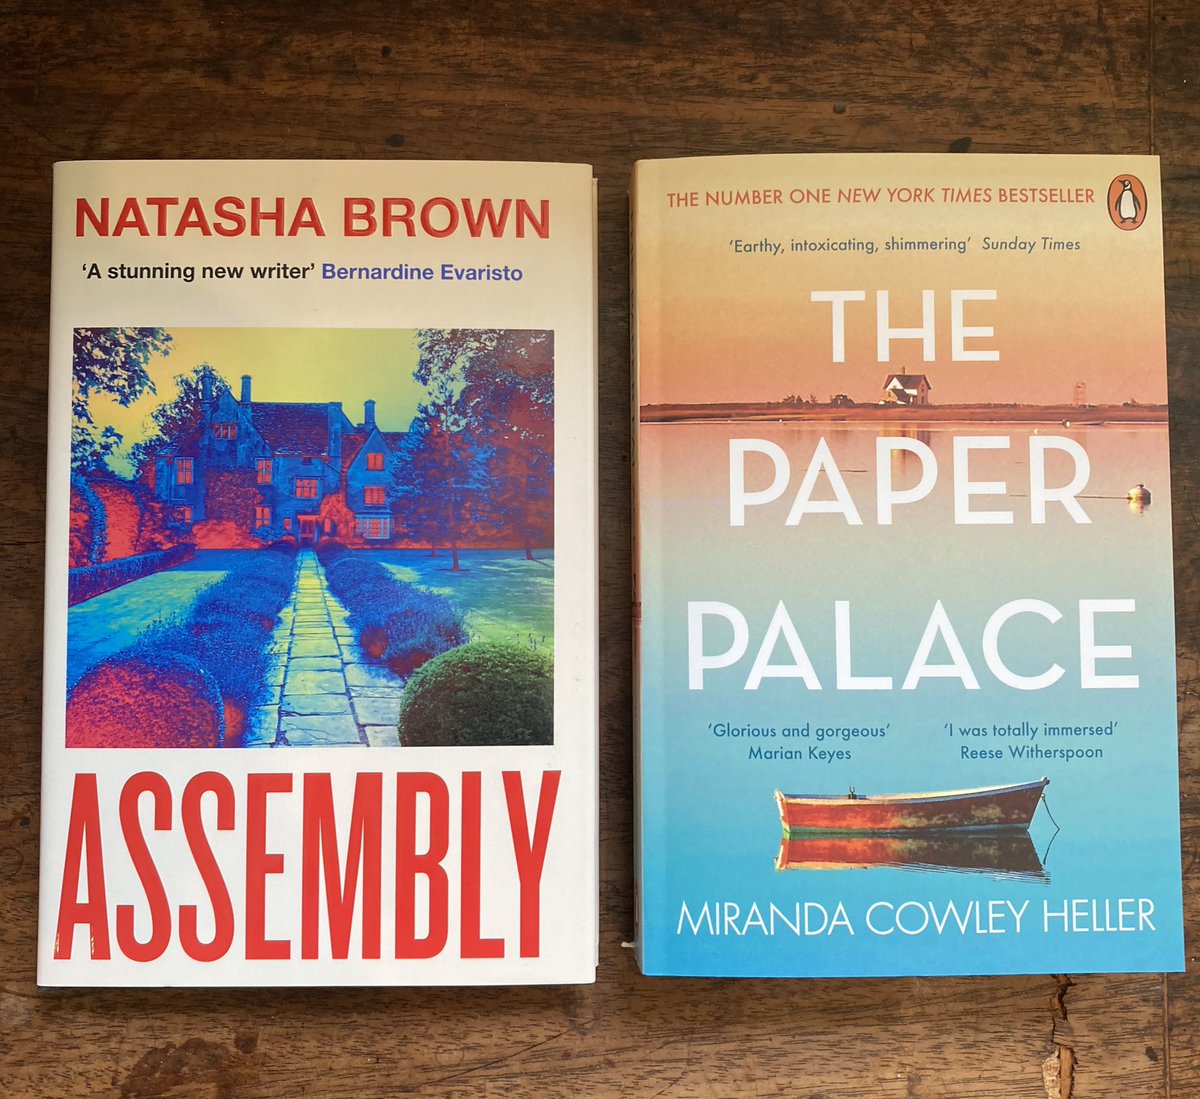 Delighted to have picked up these two beauties in @maxminervas yesterday. I even bumped into lovely Natasha Brown in the shop and she signed and dedicated my copy of #Assembly 💜. Which to start first?